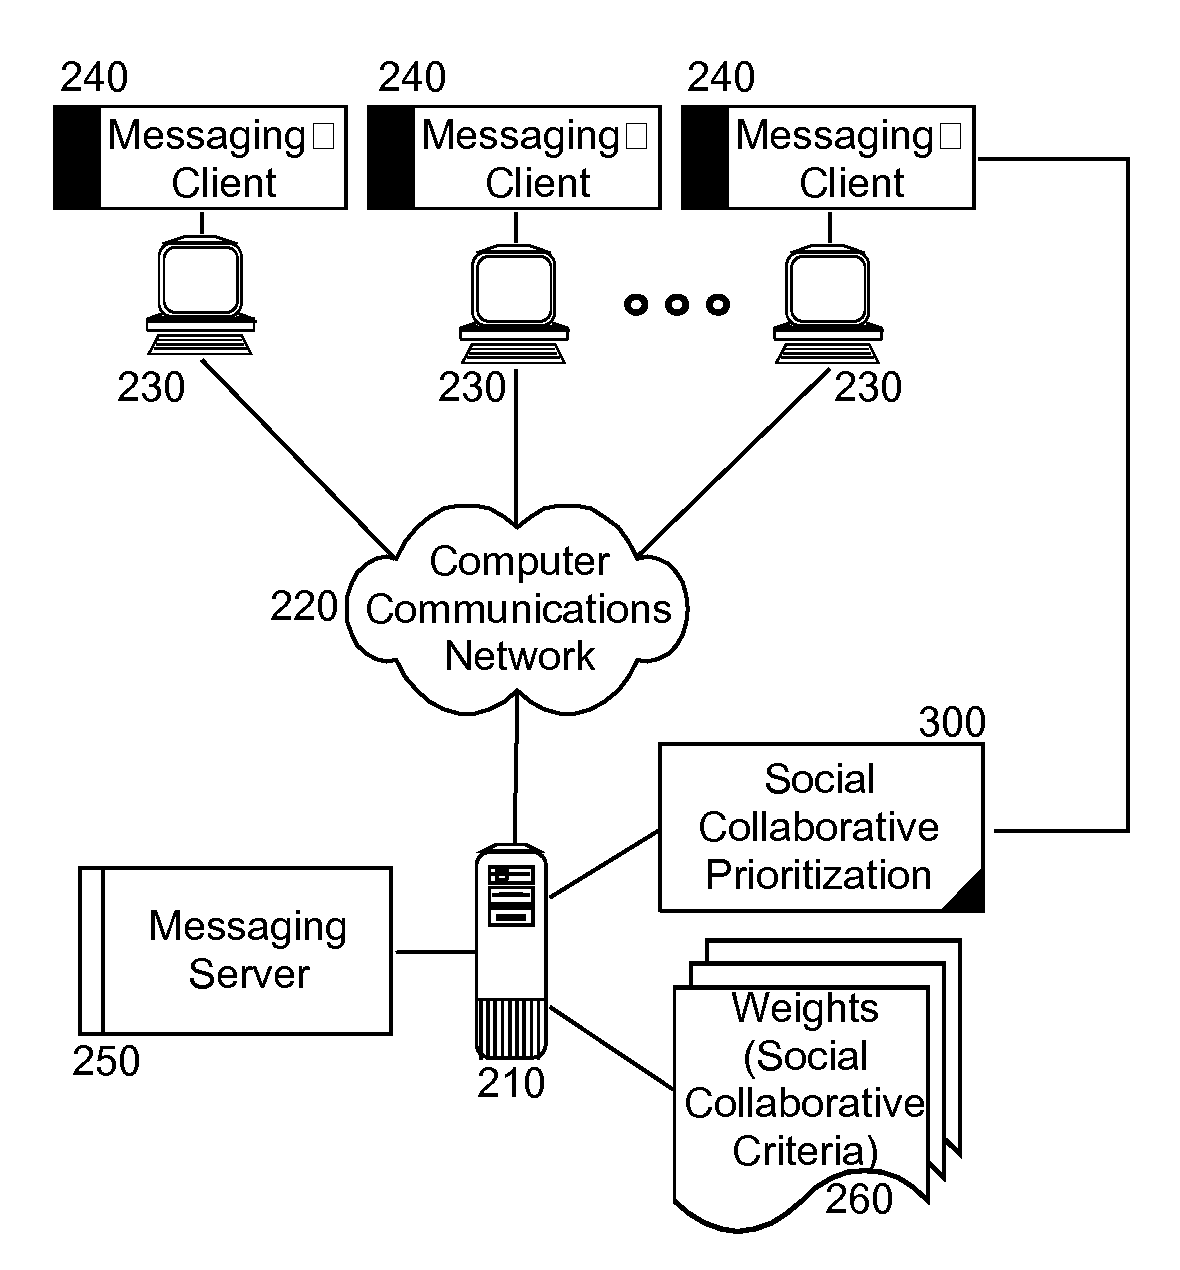 Social collaborative scoring for message prioritization according to an application interaction relationship between sender and recipient